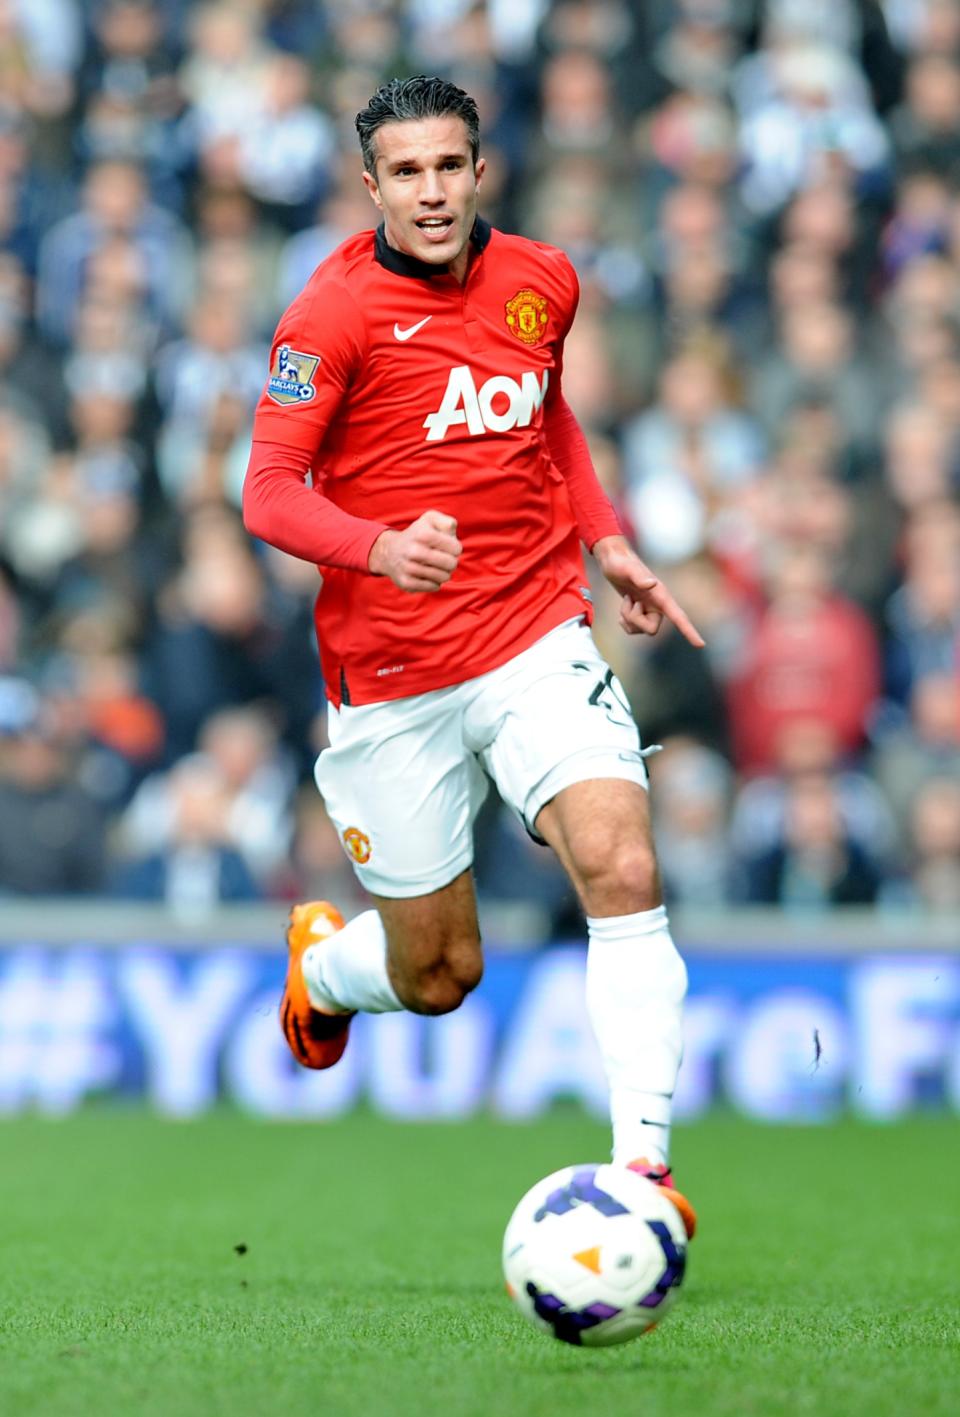 Manchester United's Robin van Persie during the English Premier League soccer match between West Bromwich Albion and Manchester United at The Hawthorns Stadium in West Bromwich, England, Saturday, March 8, 2014. (AP Photo/Rui Vieira)